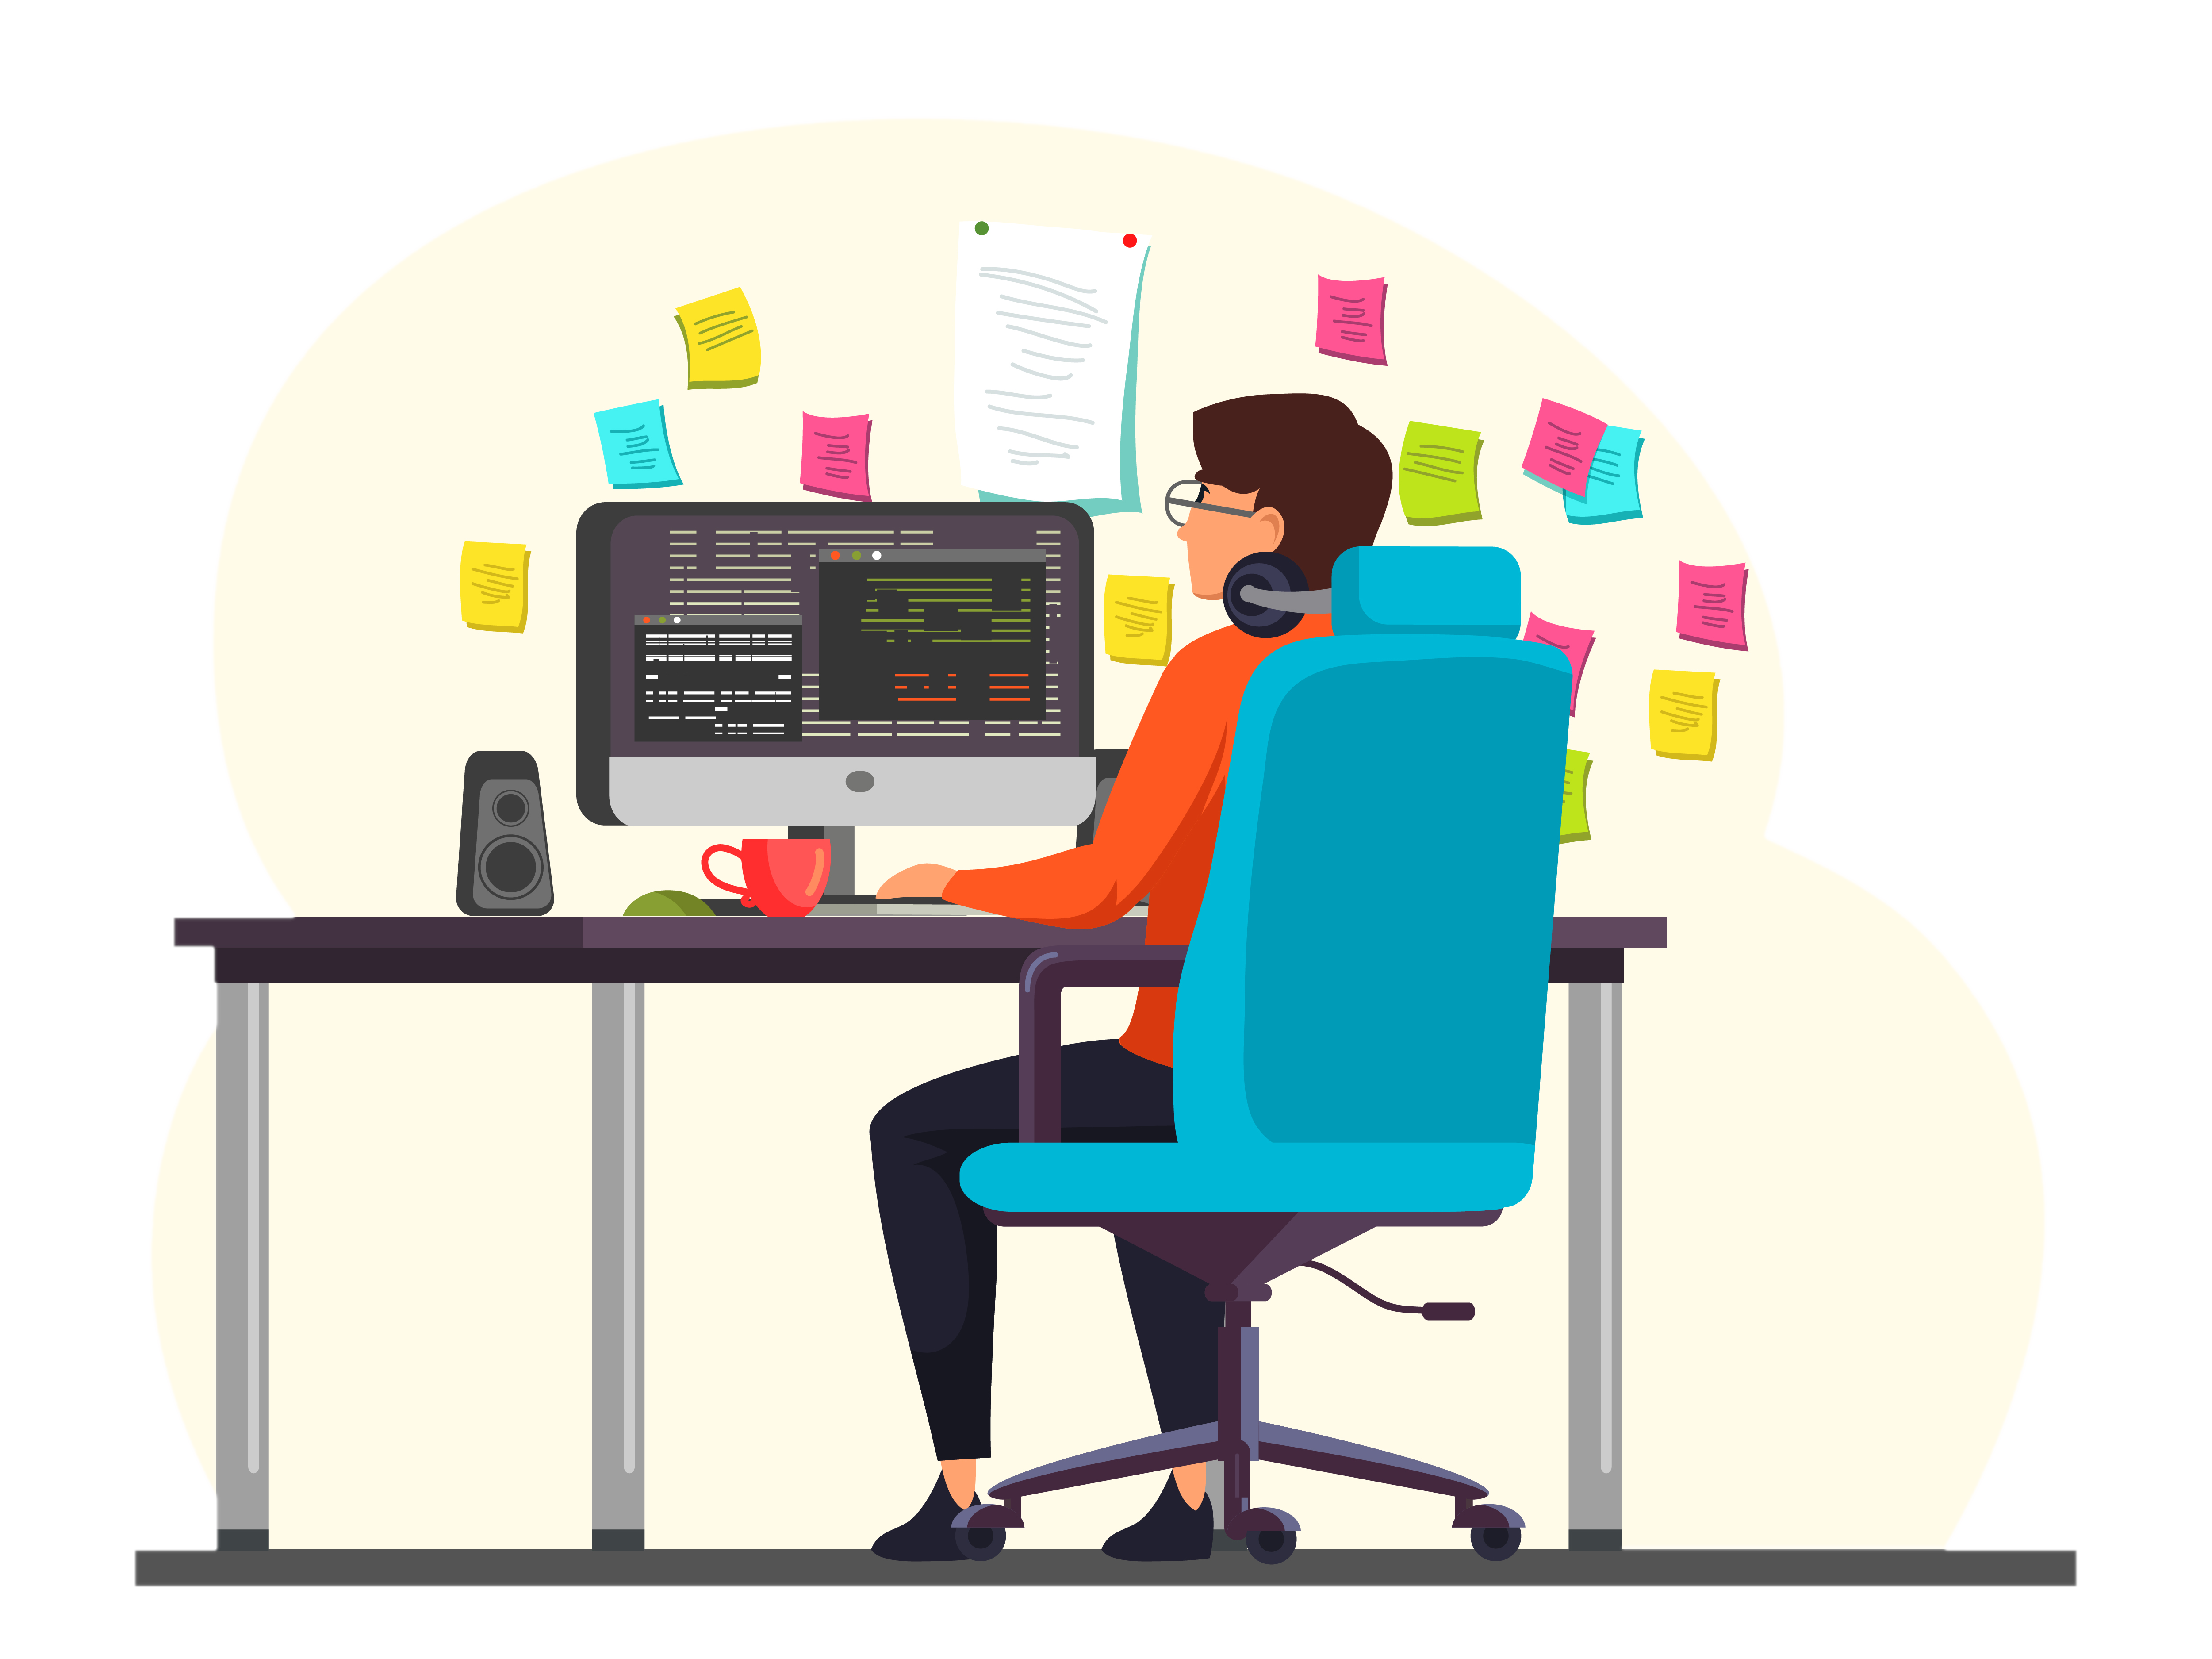 https://www.freepik.com/free-vector/male-programmer-working-computer-office-wall-with-hanging-reminder-stickers-developer-creating-new-software-interface-coding-programming-system-administrator-designer-character_25273349.htm#page=3&query=software%20engineer&position=3&from_view=search&track=sph